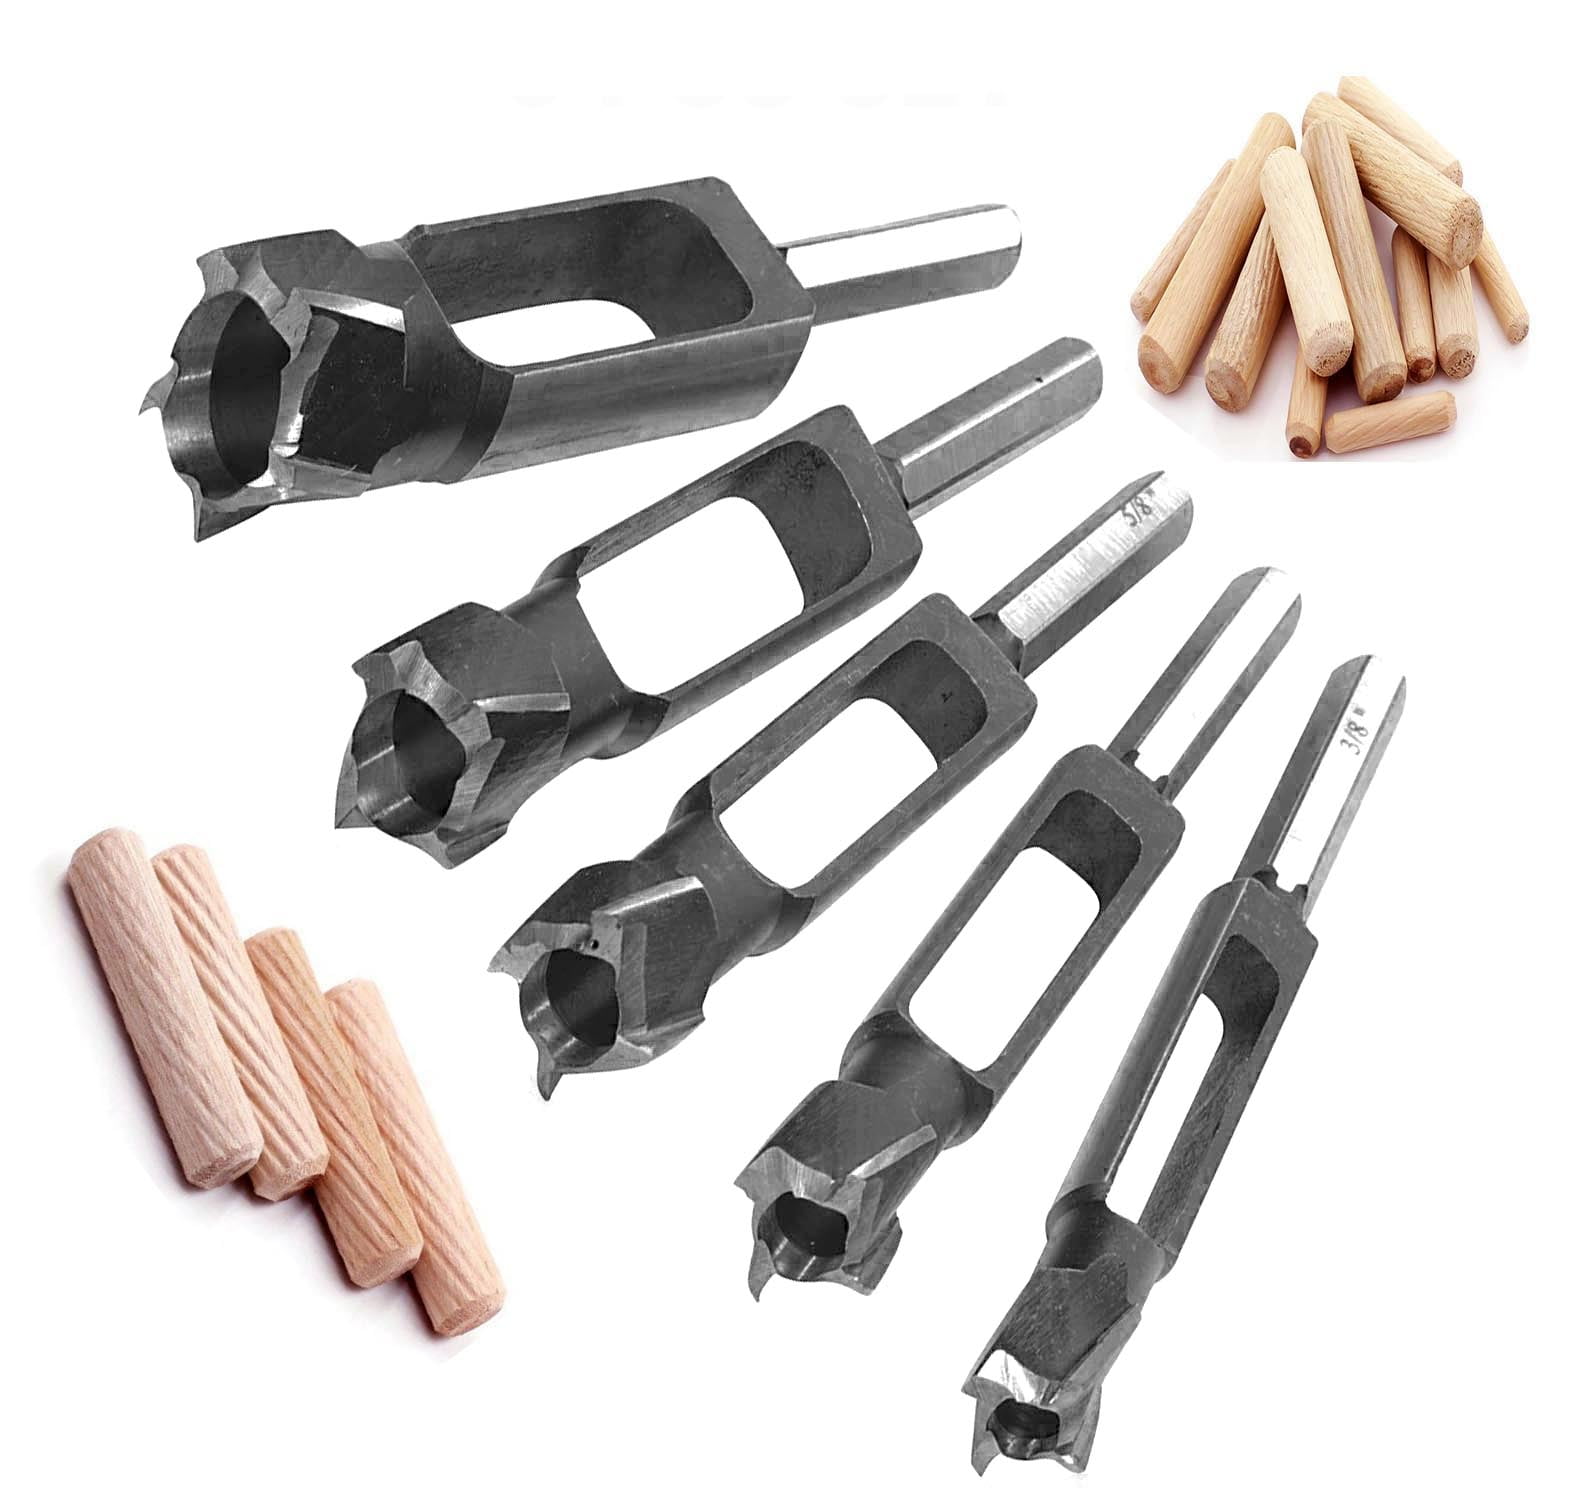 Dowel Maker and Tenon Cutters with 8mm(5/16”) and 10mm(3/8”) Cutter Heads  for Wood Rods and Sticks